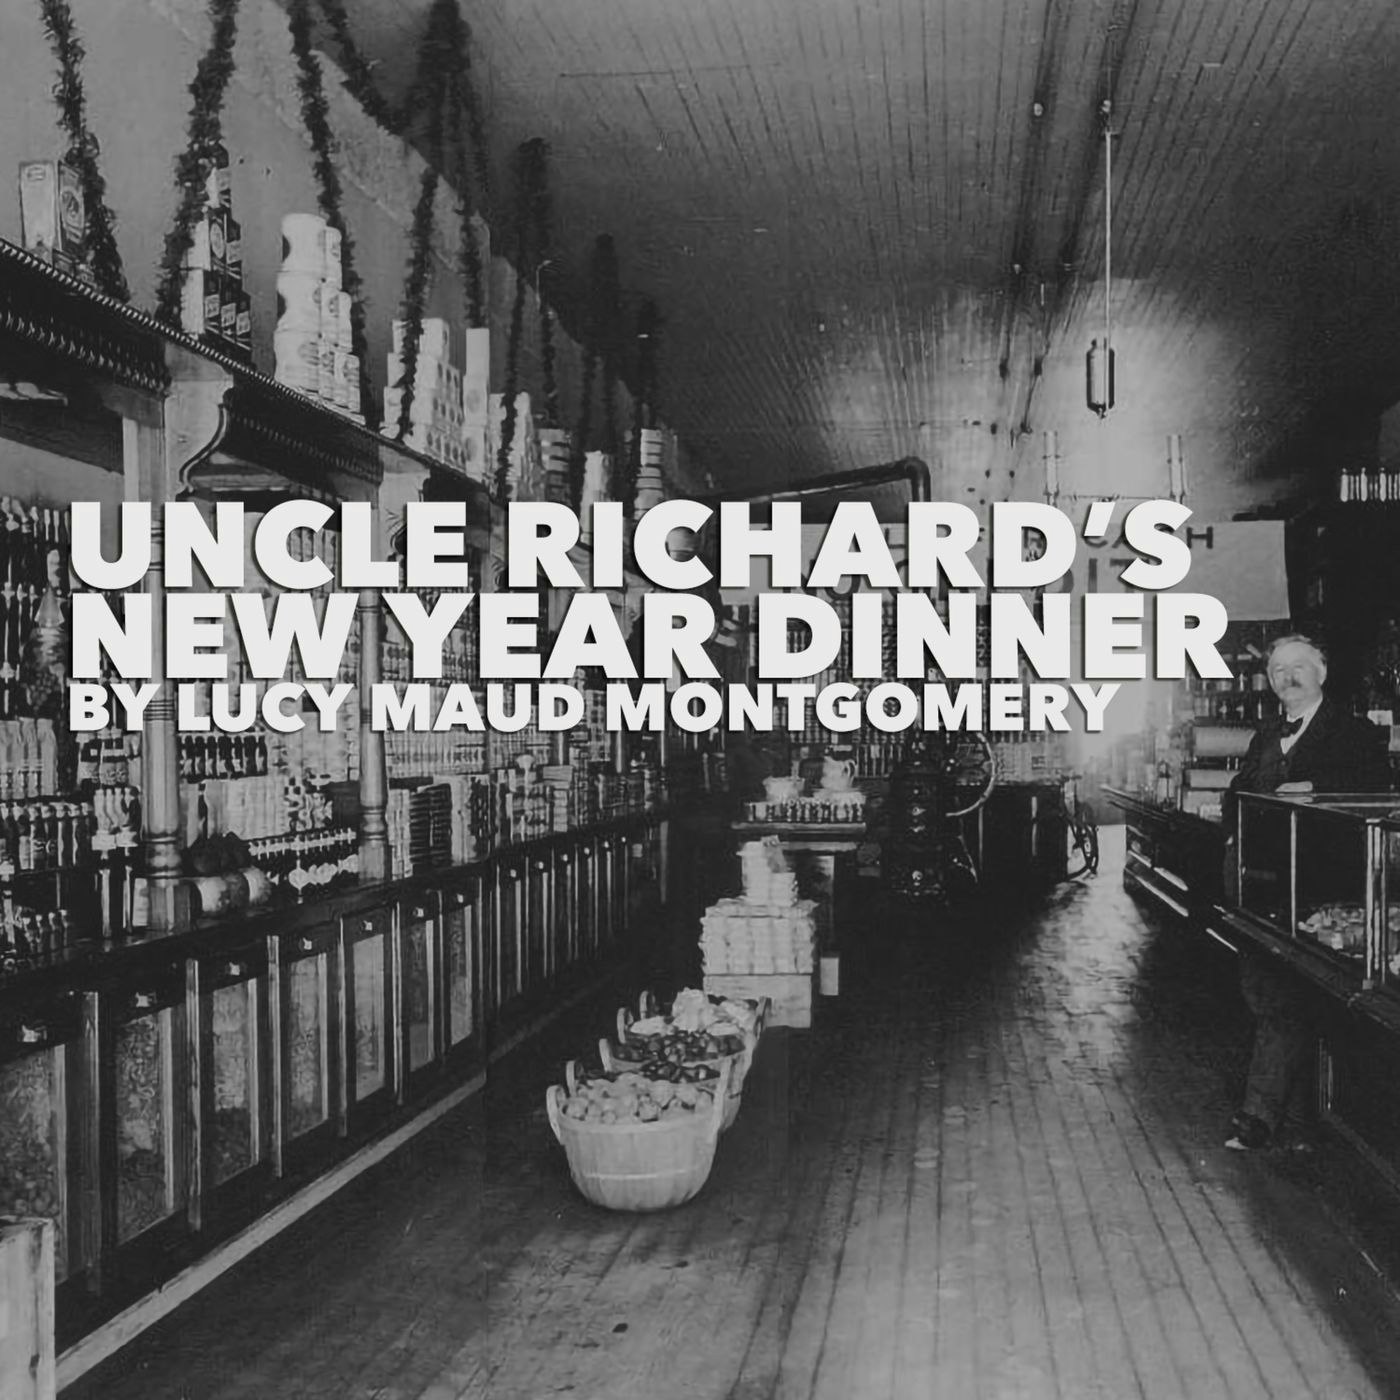 Uncle Richard’s New Year Dinner by Lucy Maud Montgomery